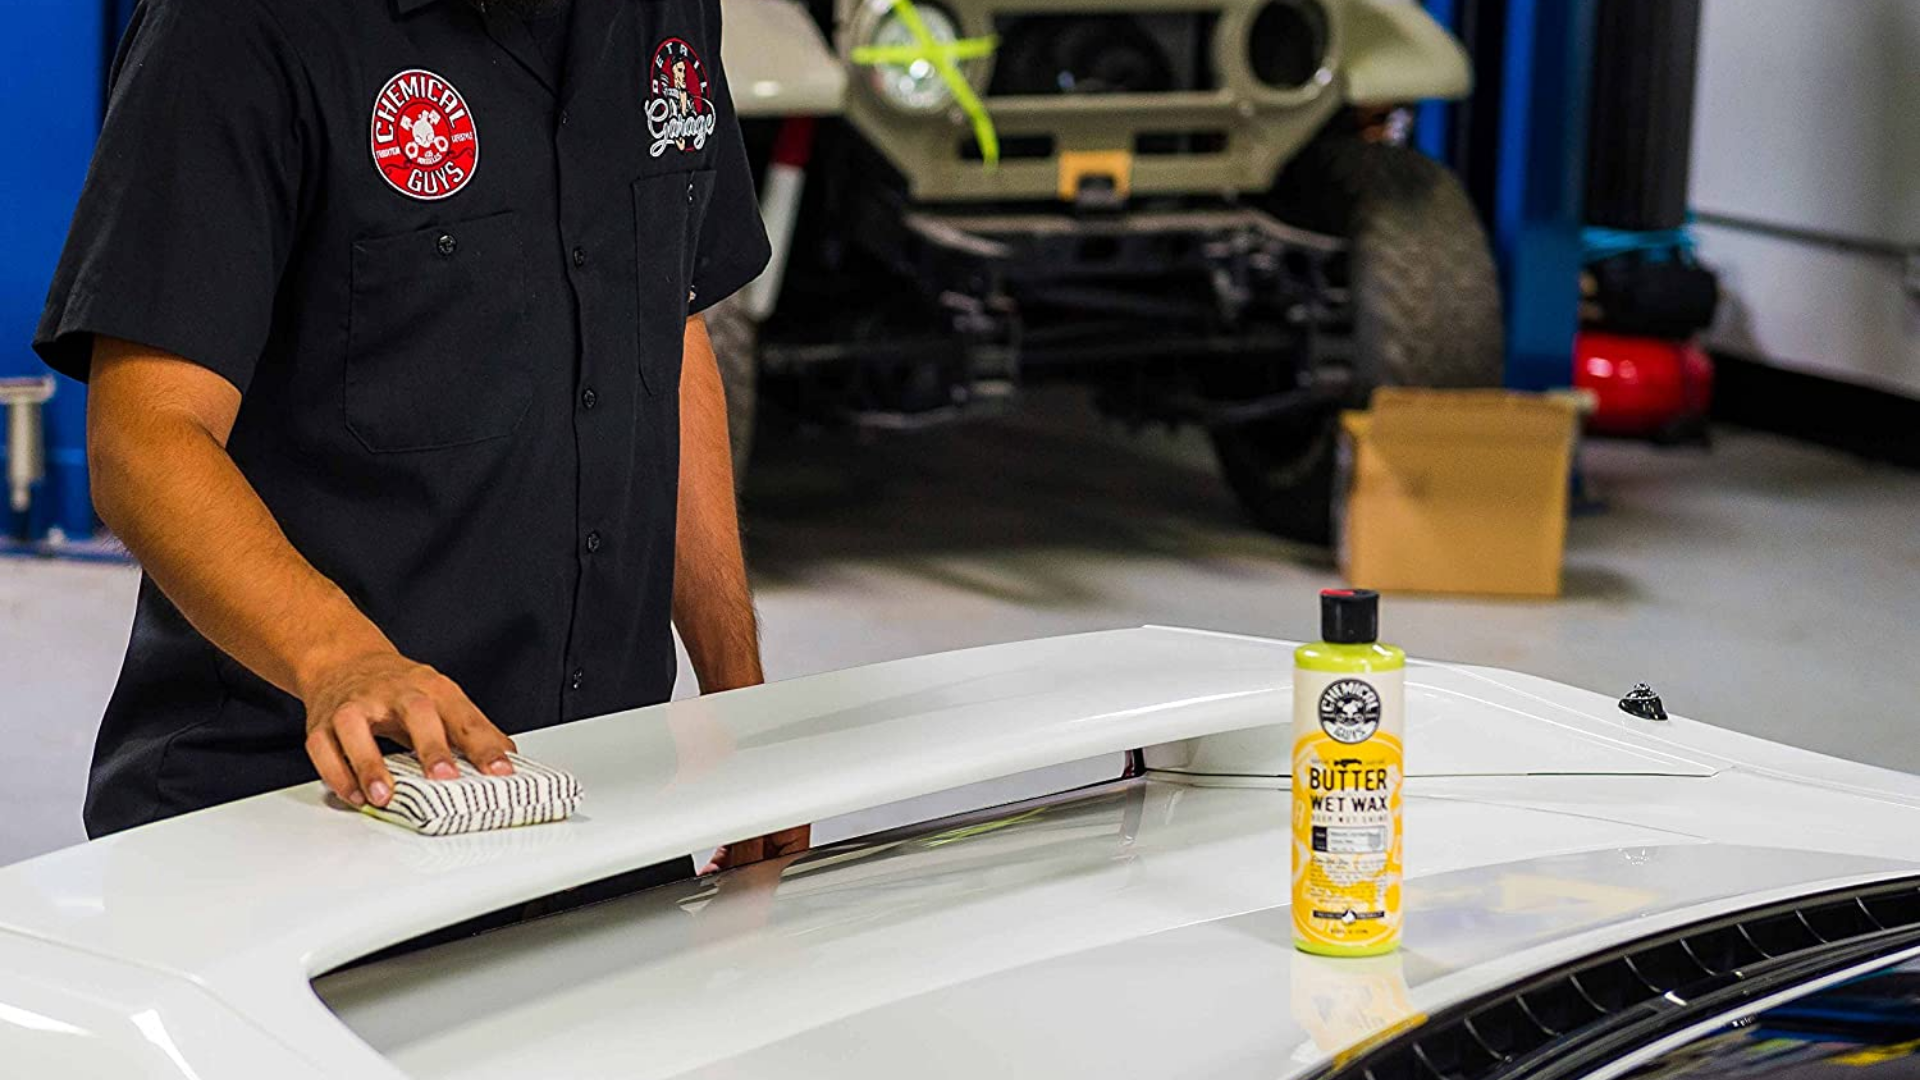 Waxing Your Car? Do This First! - Chemical Guys 